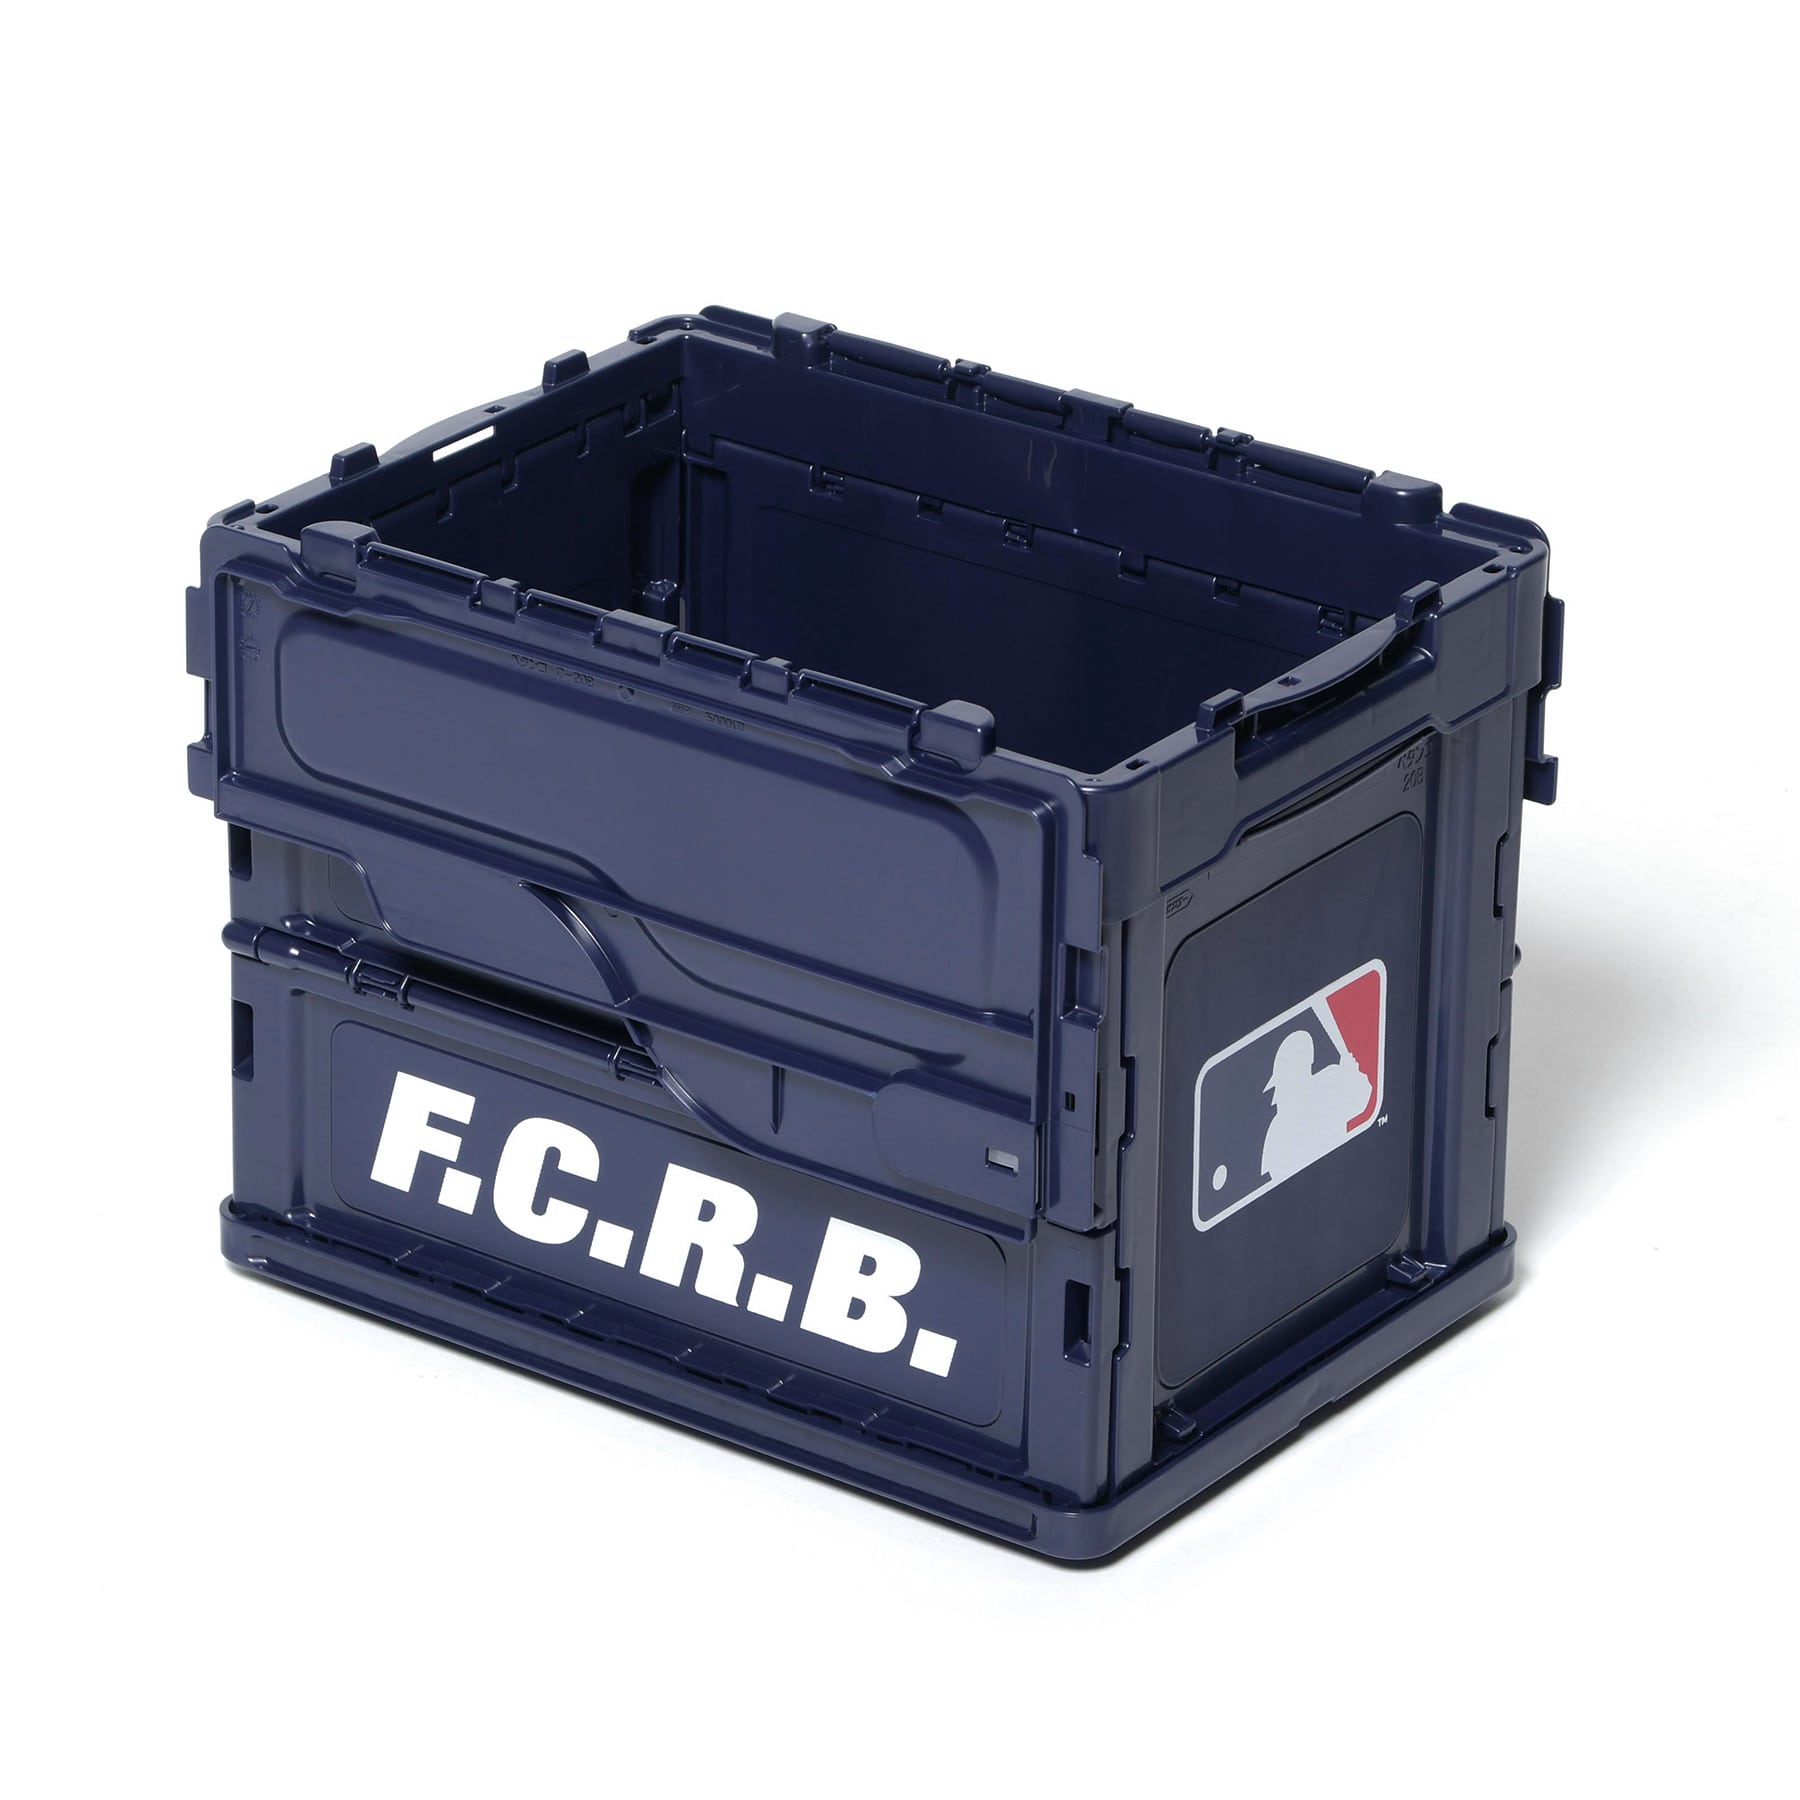 MLB TOUR SMALL FOLDABLE CONTAINER | F.C.Real Bristol